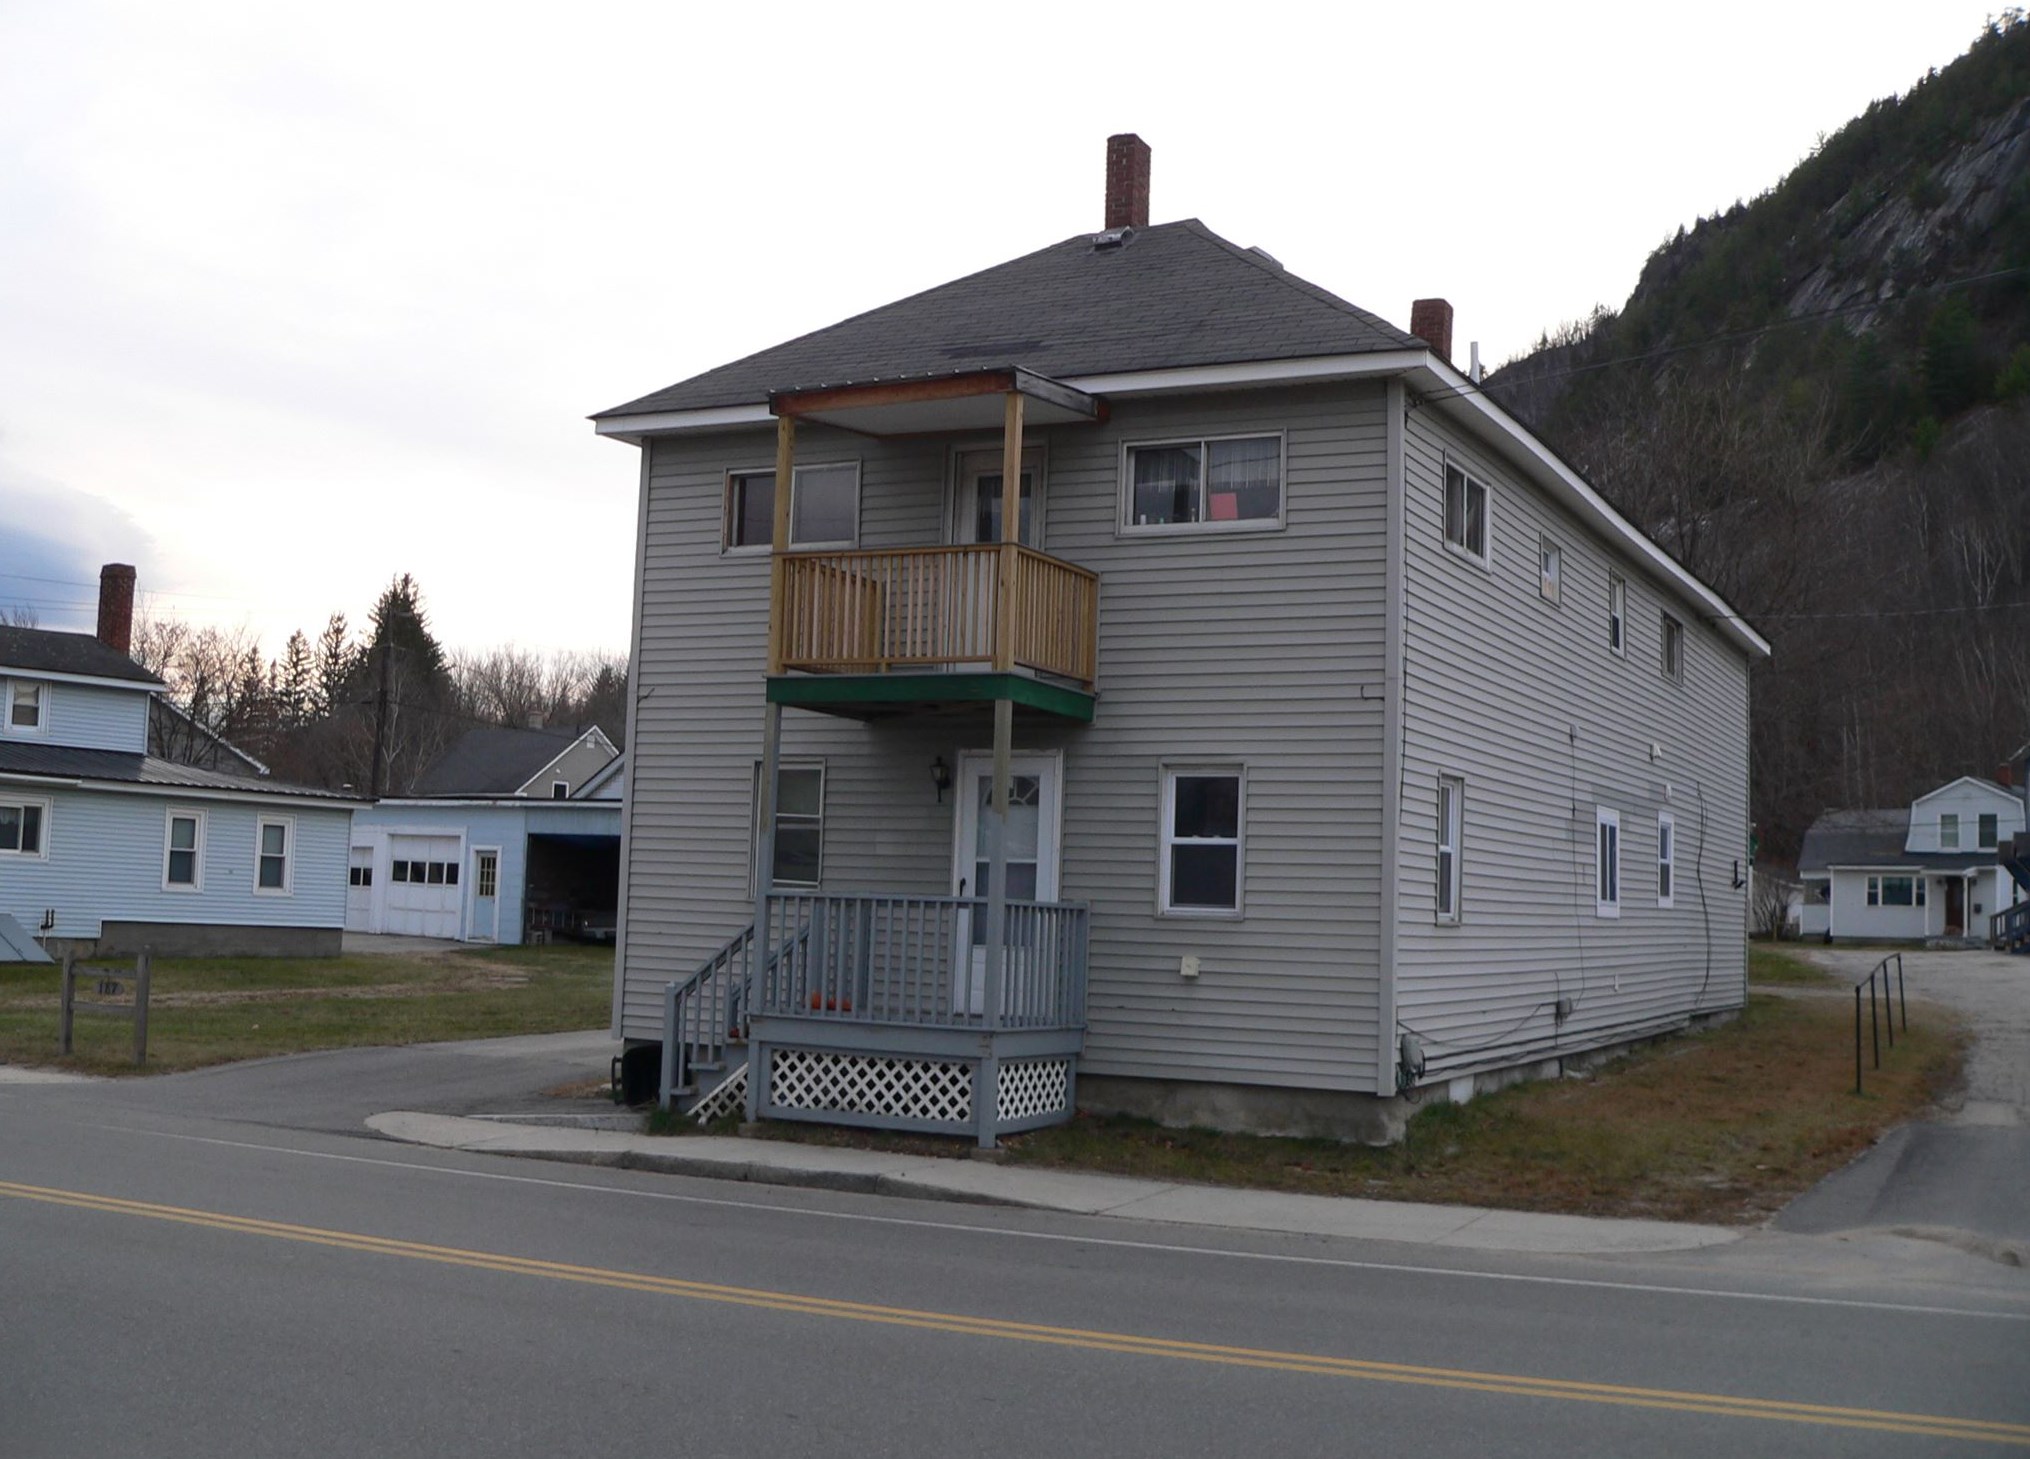 187 Wight St, Berlin, NH 03570 exterior